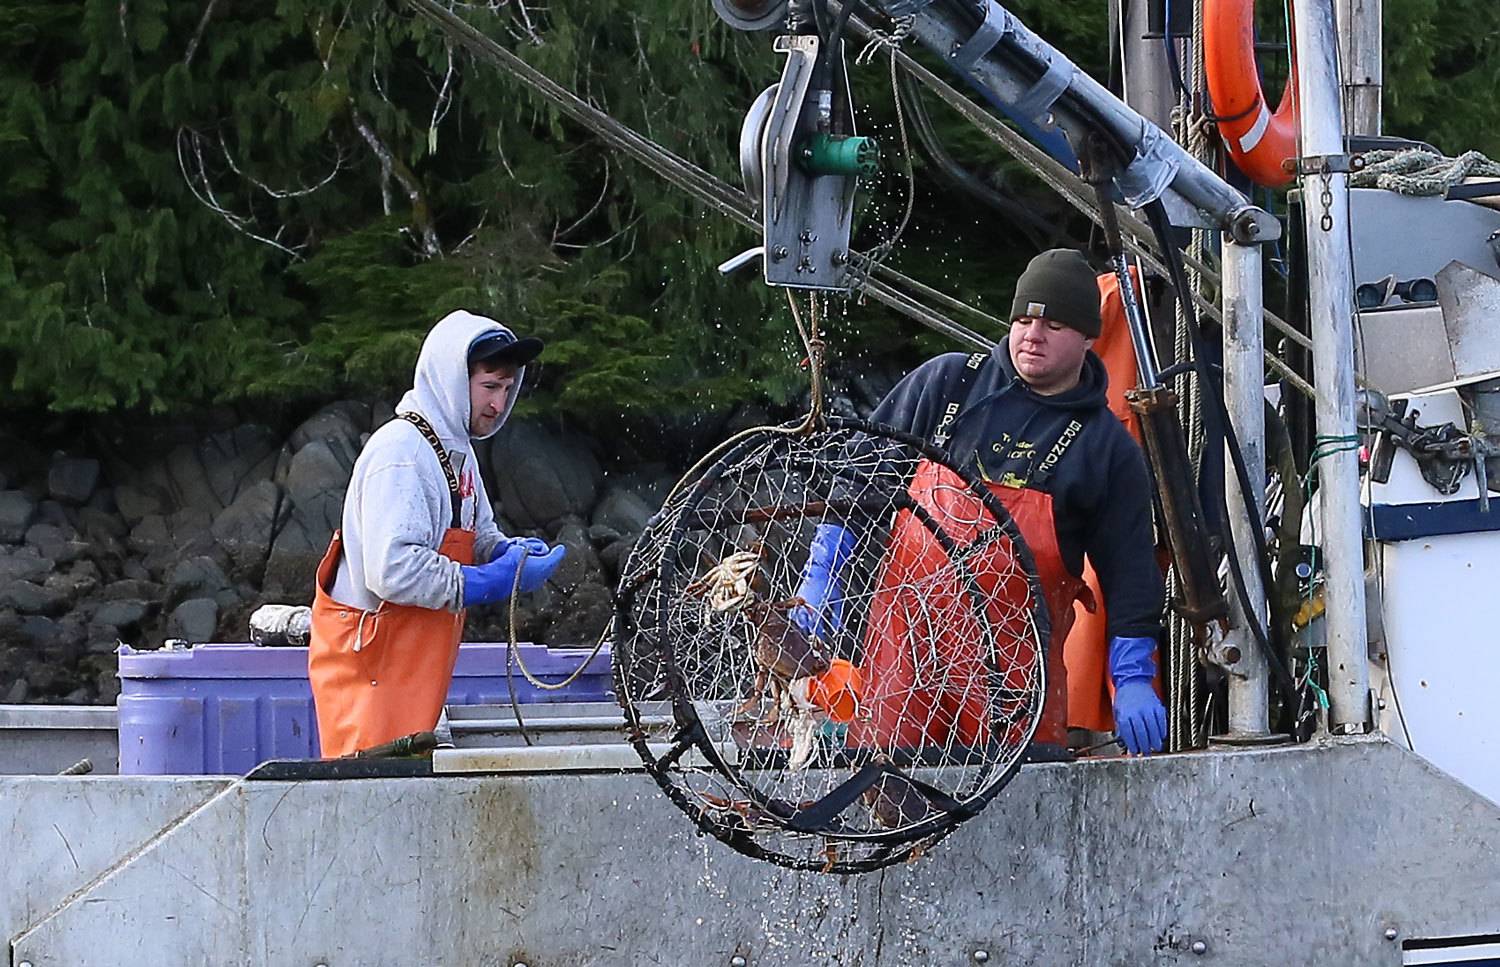 Dungeness_crab_commercial_fishing_2065.jpg